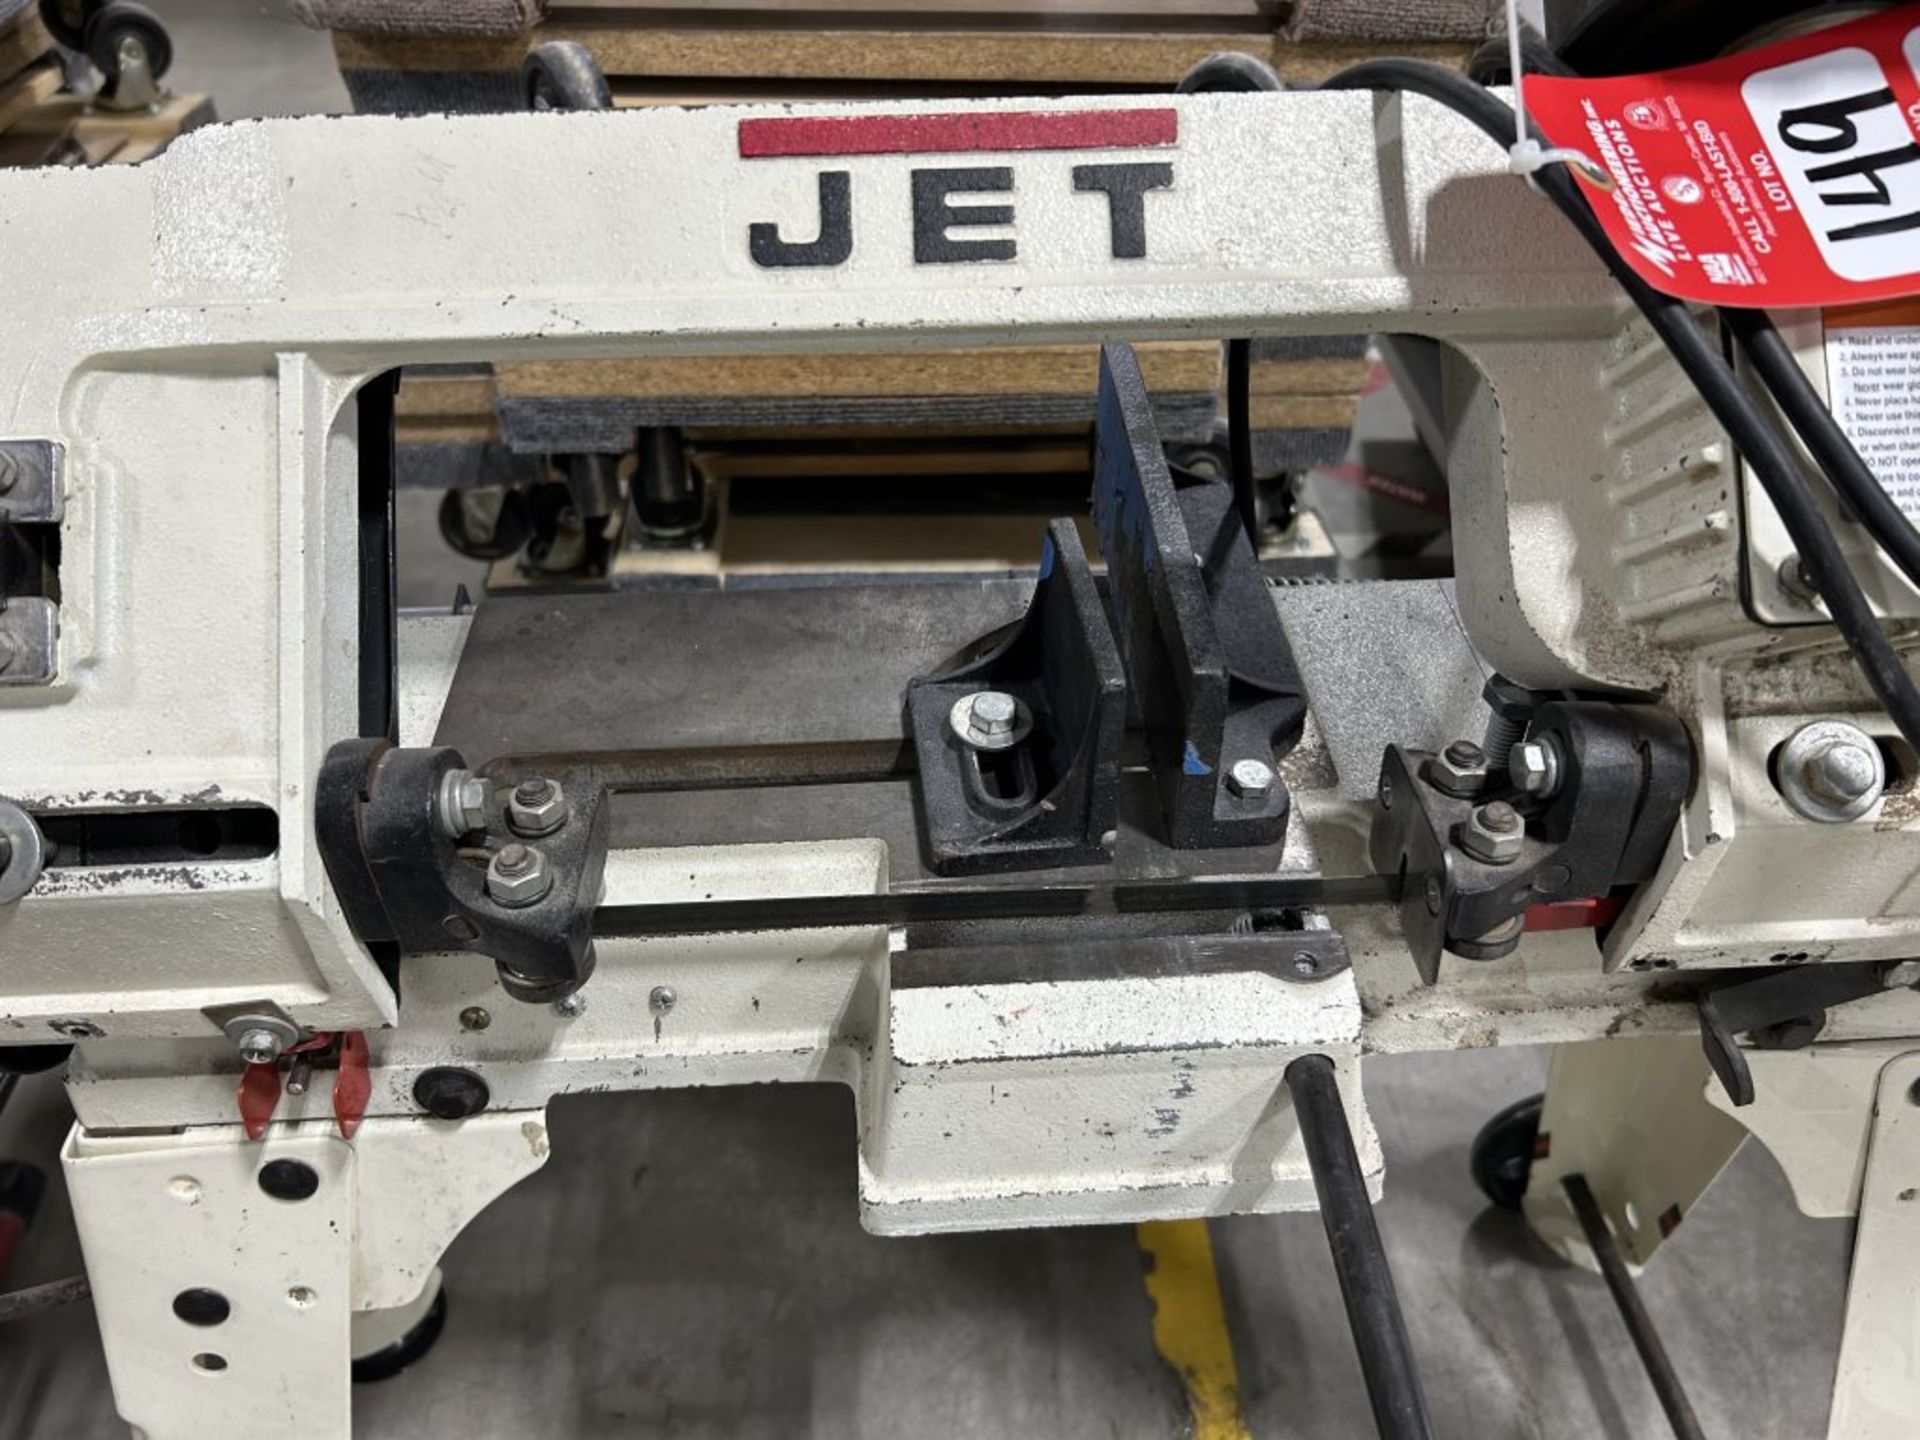 JET METAL CUTTING BAND SAW, 1/2 HP MOTOR, WITH SPARE BLADE - Image 3 of 7